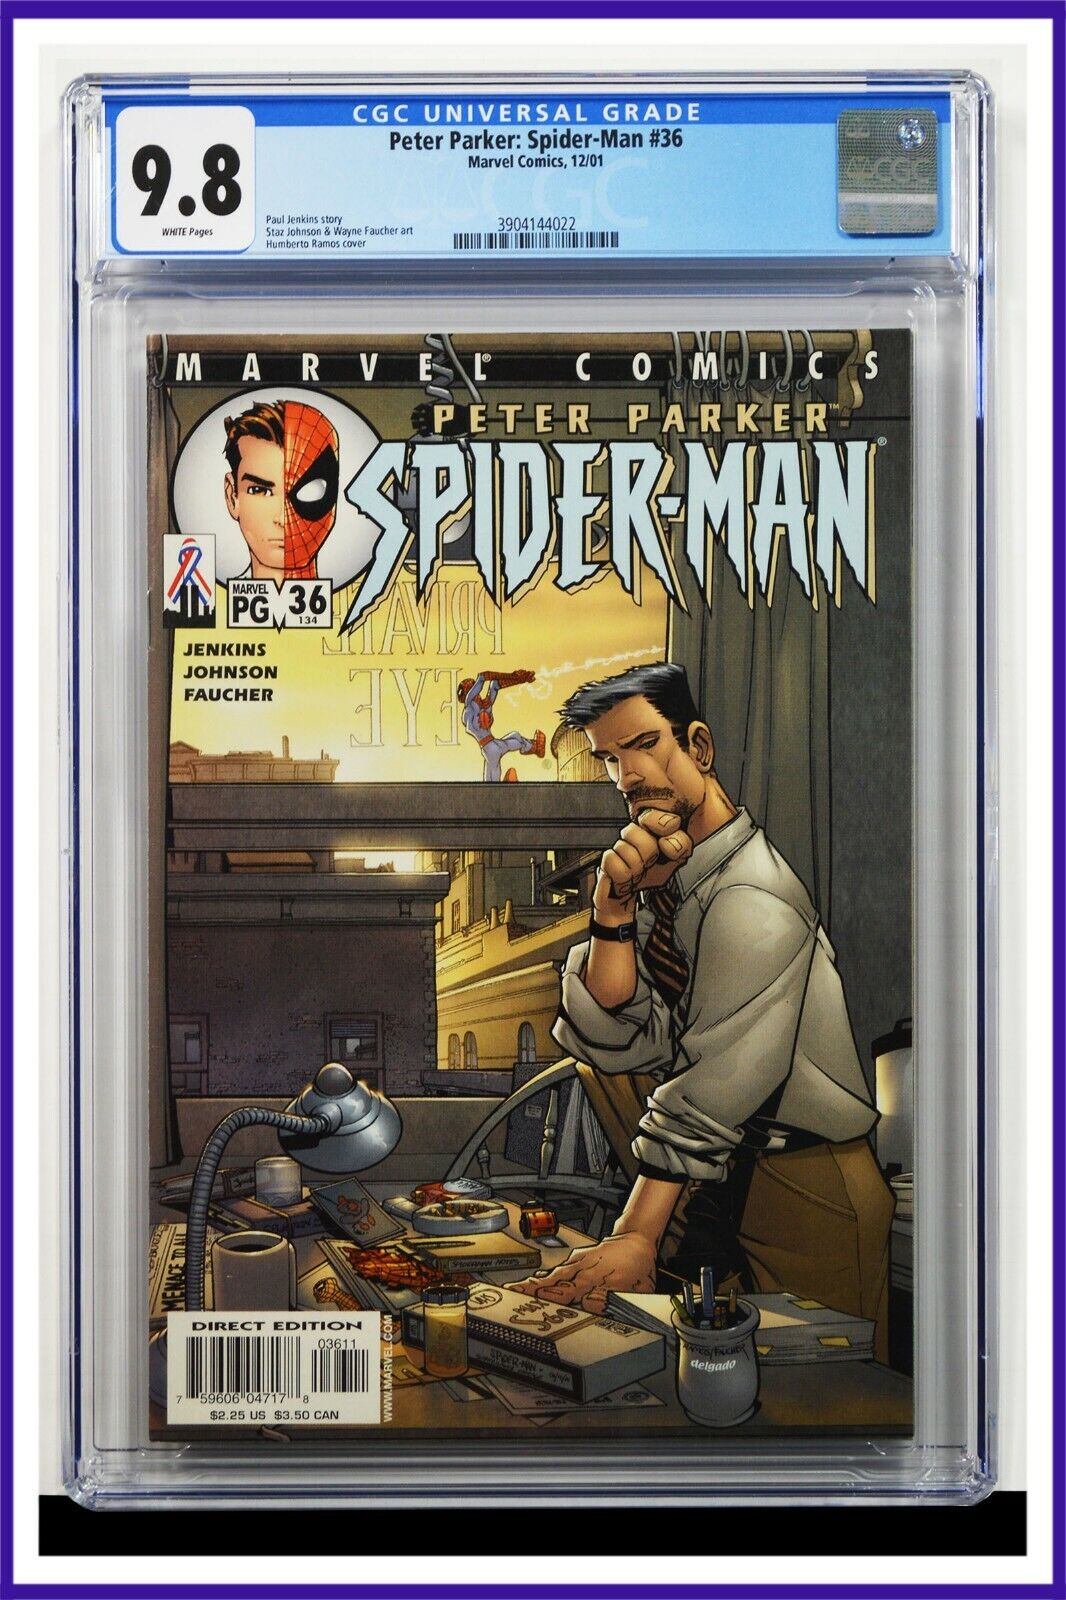 Peter Parker Spider-Man #36 CGC Graded 9.8 Marvel 2001 White Pages Comic Book.